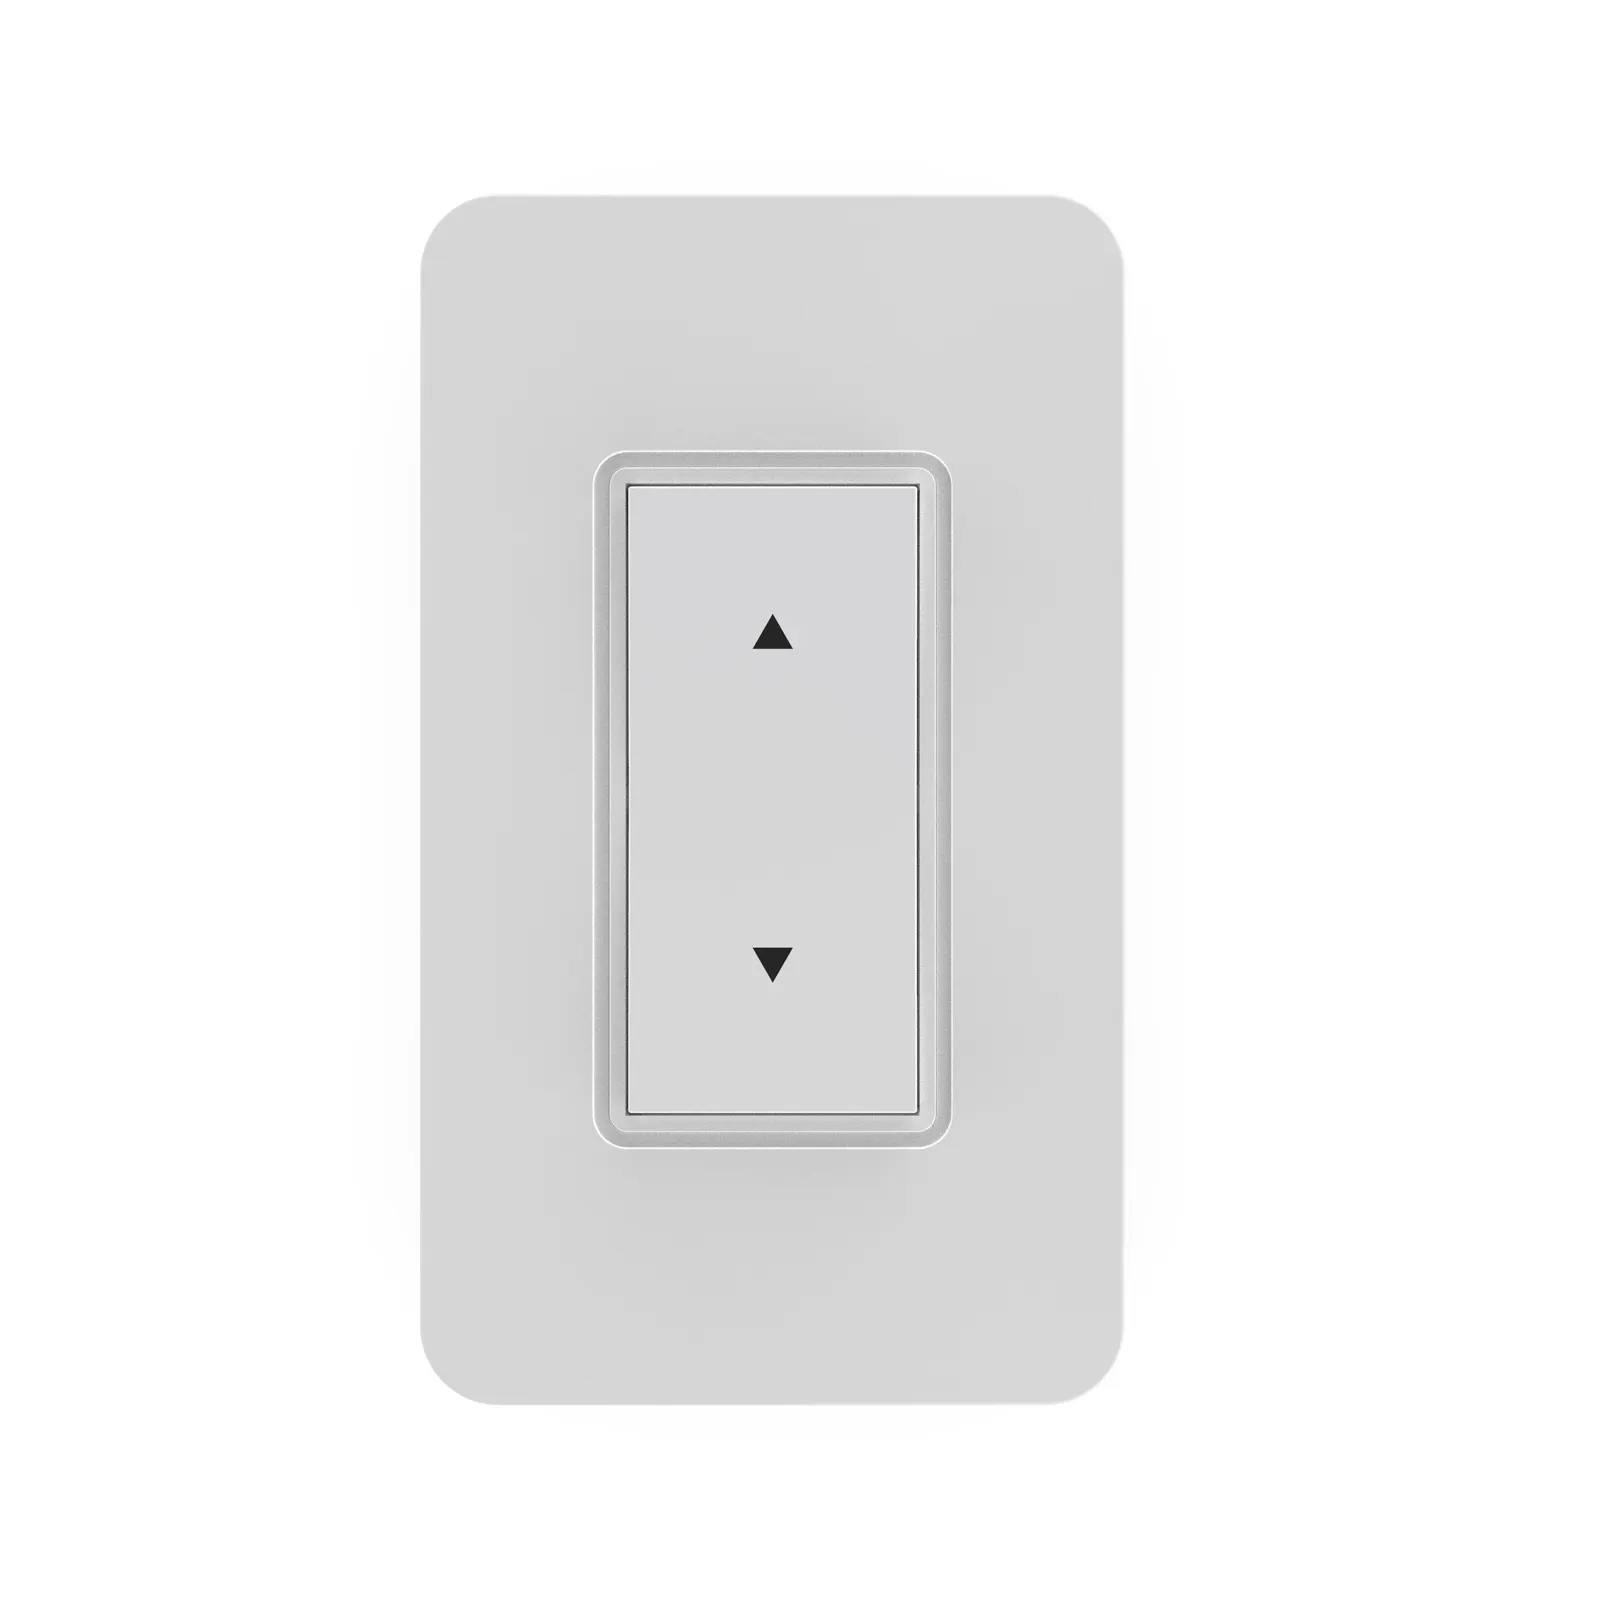 Smart Dimmer light Switch Smart socket Smart Home Devices Works with Alexa